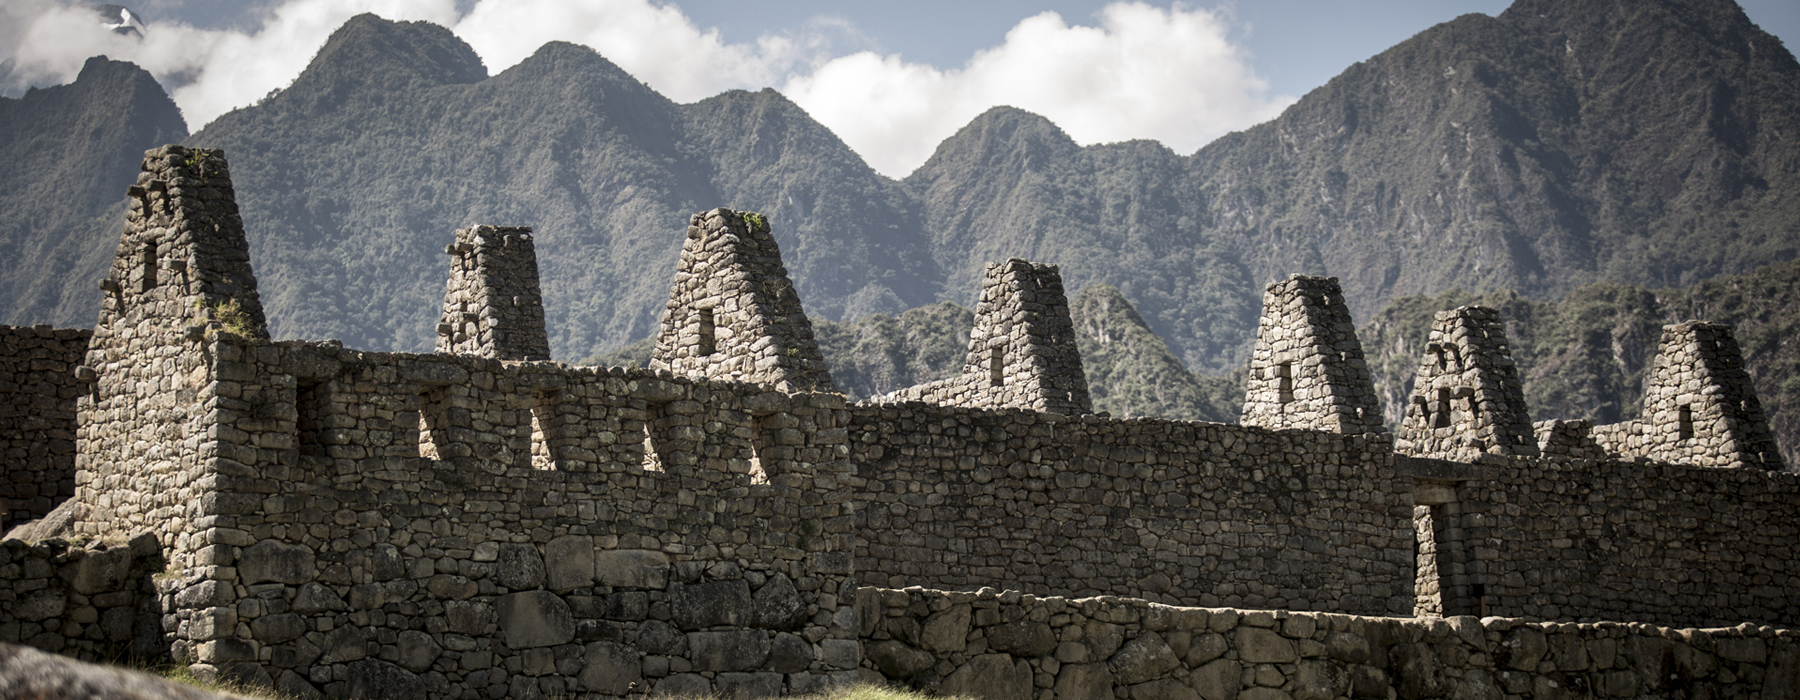 Machu Picchu Walls, Mountain Lodges, Sacred Valley - Atelier South America